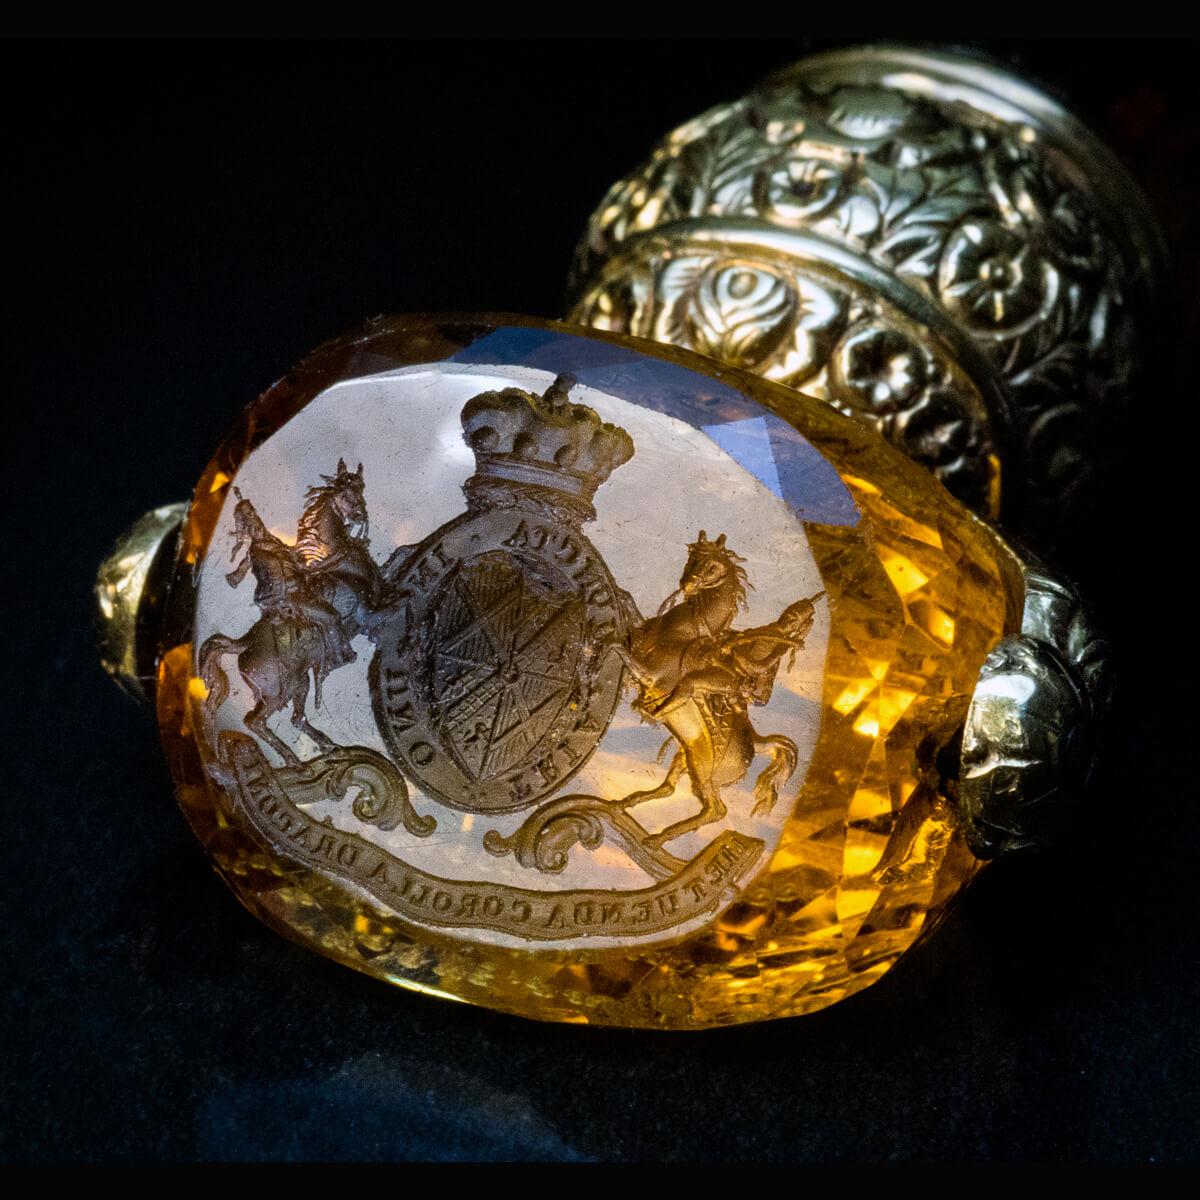 The gold mounted carved citrine desk seal of Charles William Vane, one of Britain’s wealthiest men, who was also the 3rd Marquess of Londonderry (1778-1854), Cavalry General, aide-de-camp to King George III, politician, Under-Secretary of State for